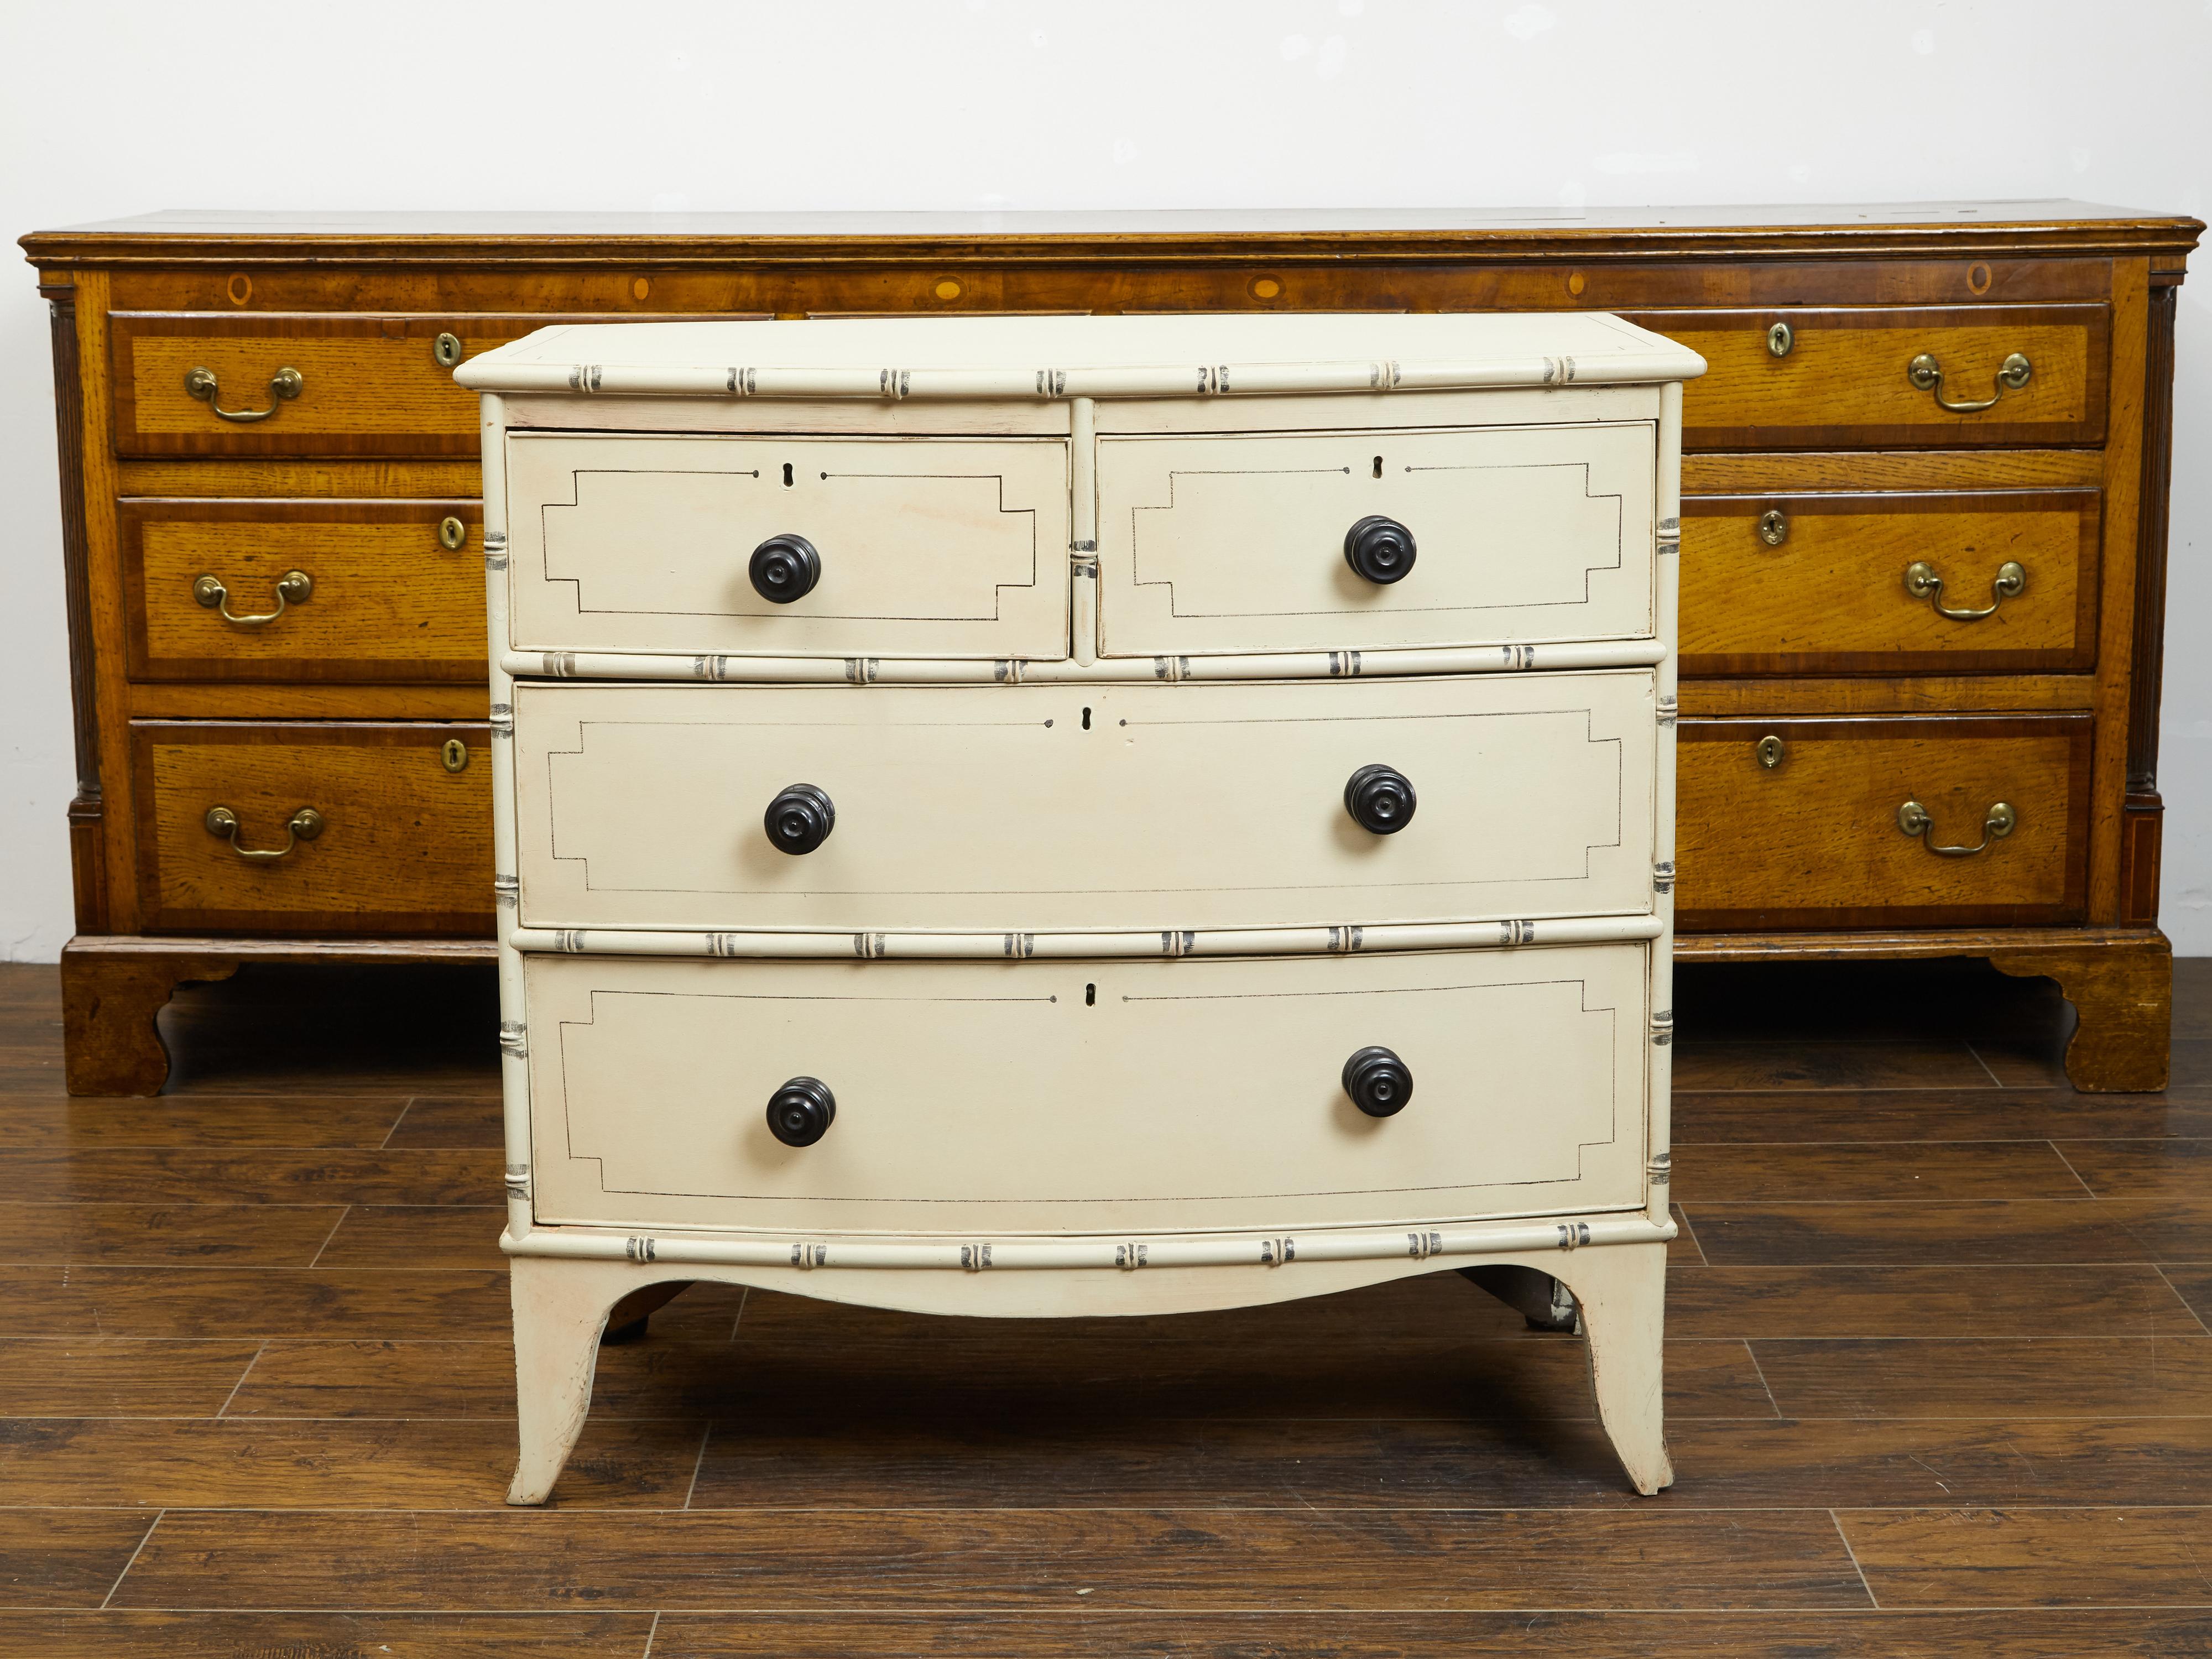 An English painted wood four-drawer bow front chest from the mid 19th century with faux bamboo accents and cartouche motifs. Created in England during the 1850s, this chest features a rectangular top with curving front, sitting above four drawers